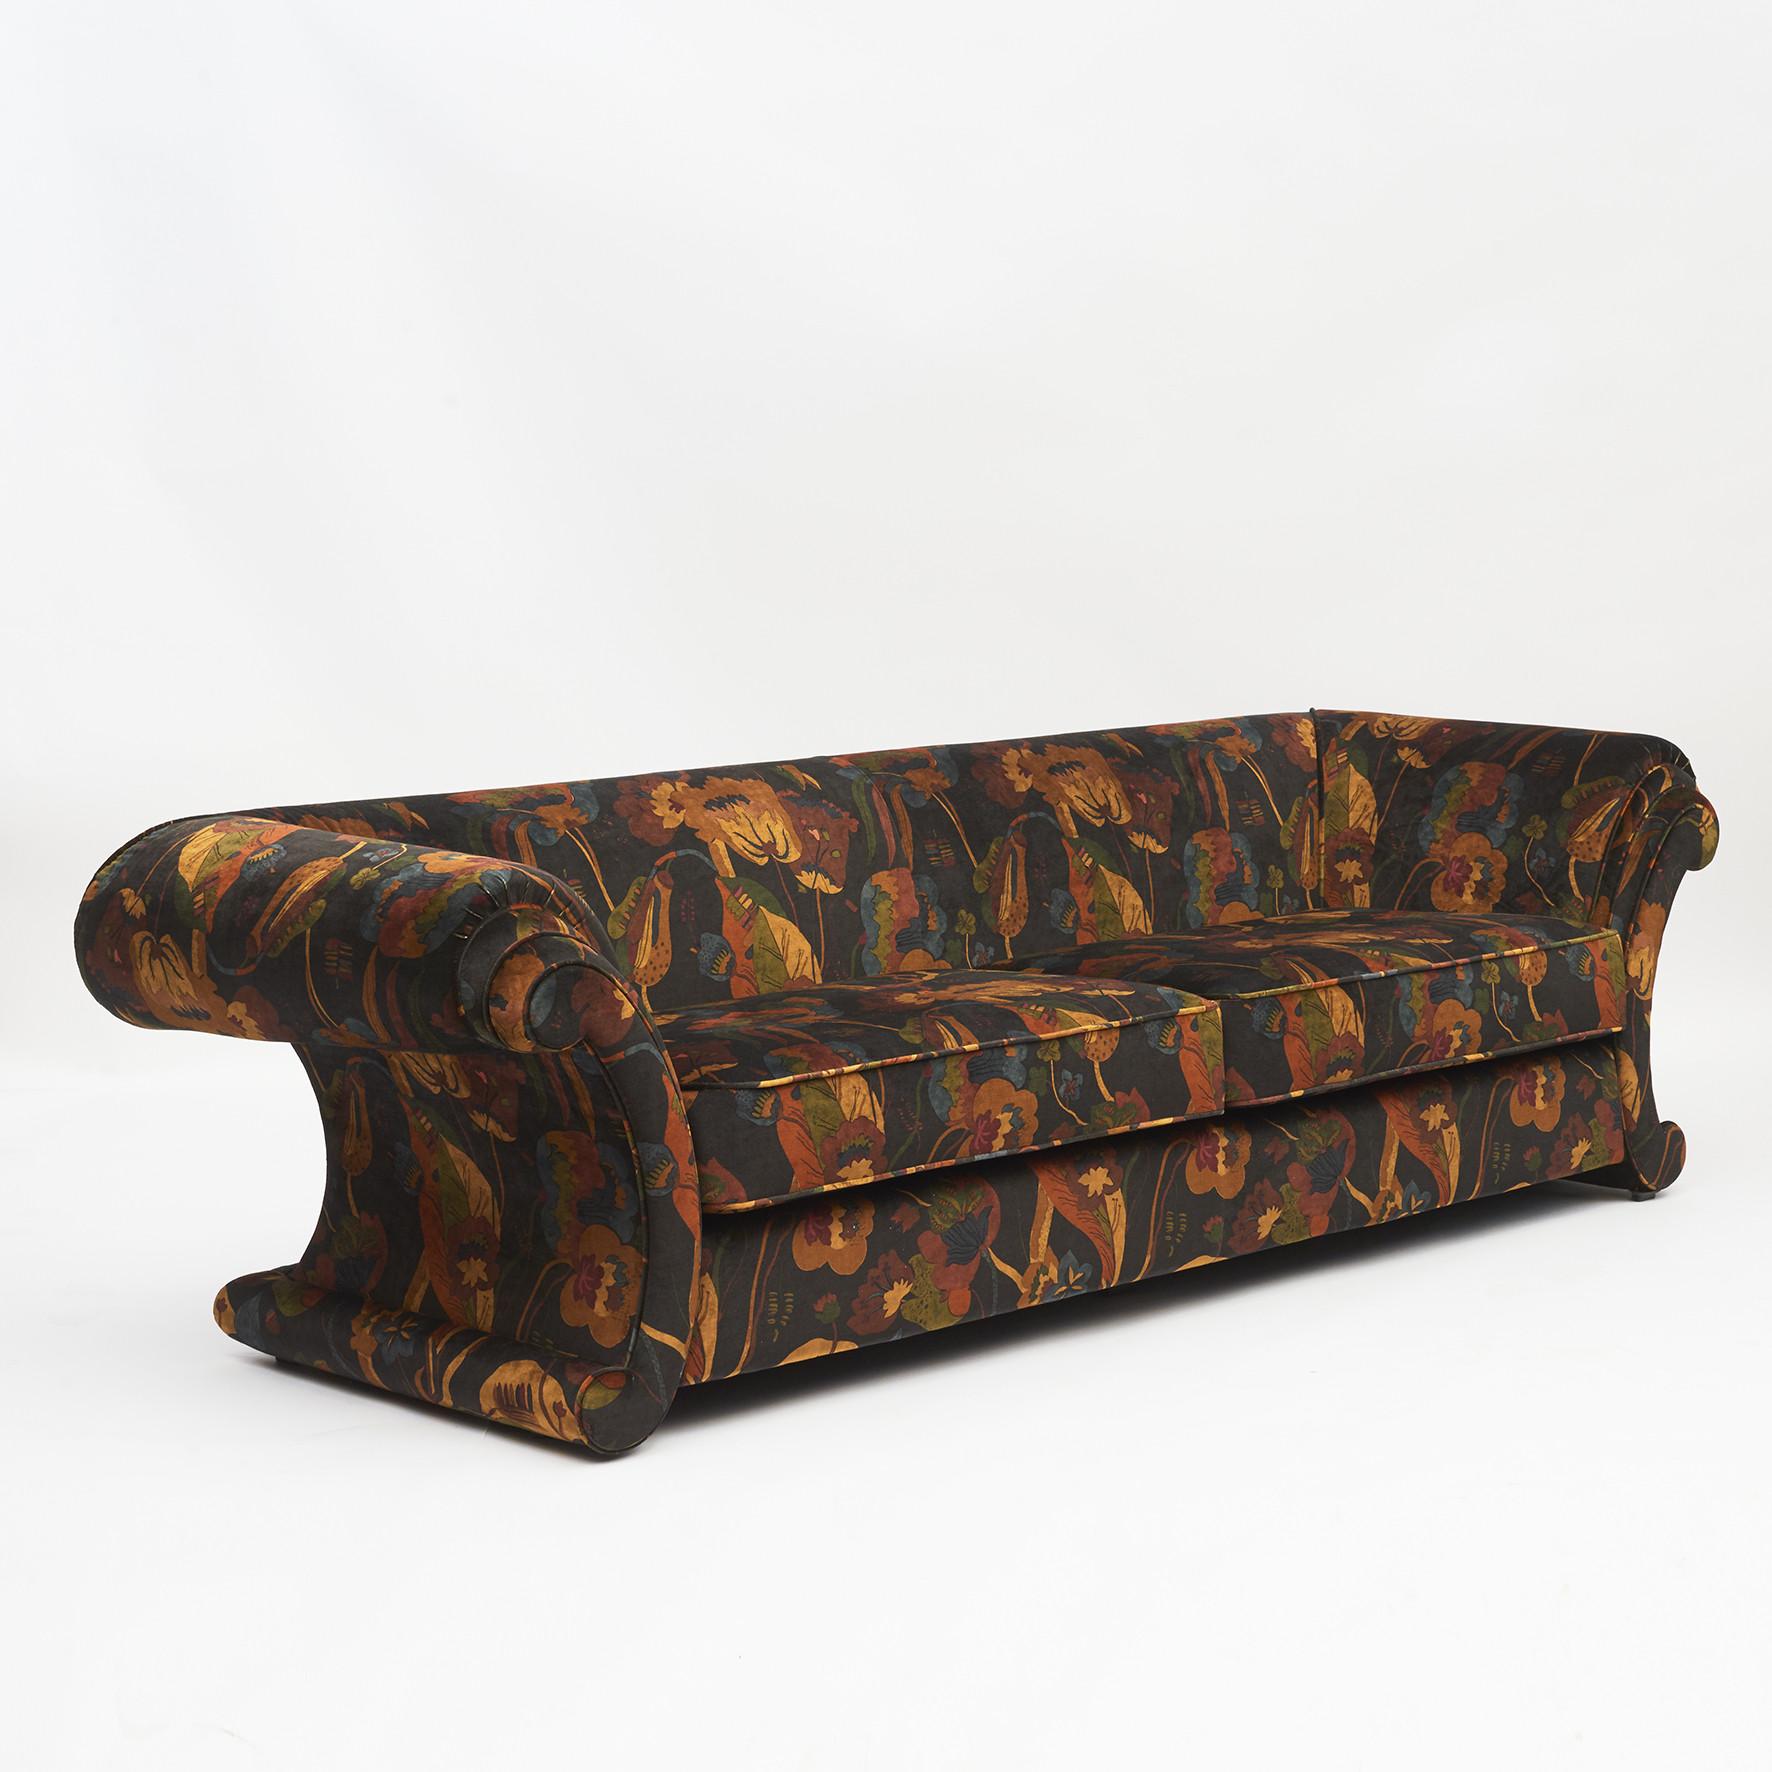 Italian design sofa, very elegant shape.
2 loose cushions.
Newly upholstered in printed velvet from GP & J Baker.
Good seating comfort.
Incl. in the price are 4 pillows. See photo,
Italy, circa 1970.